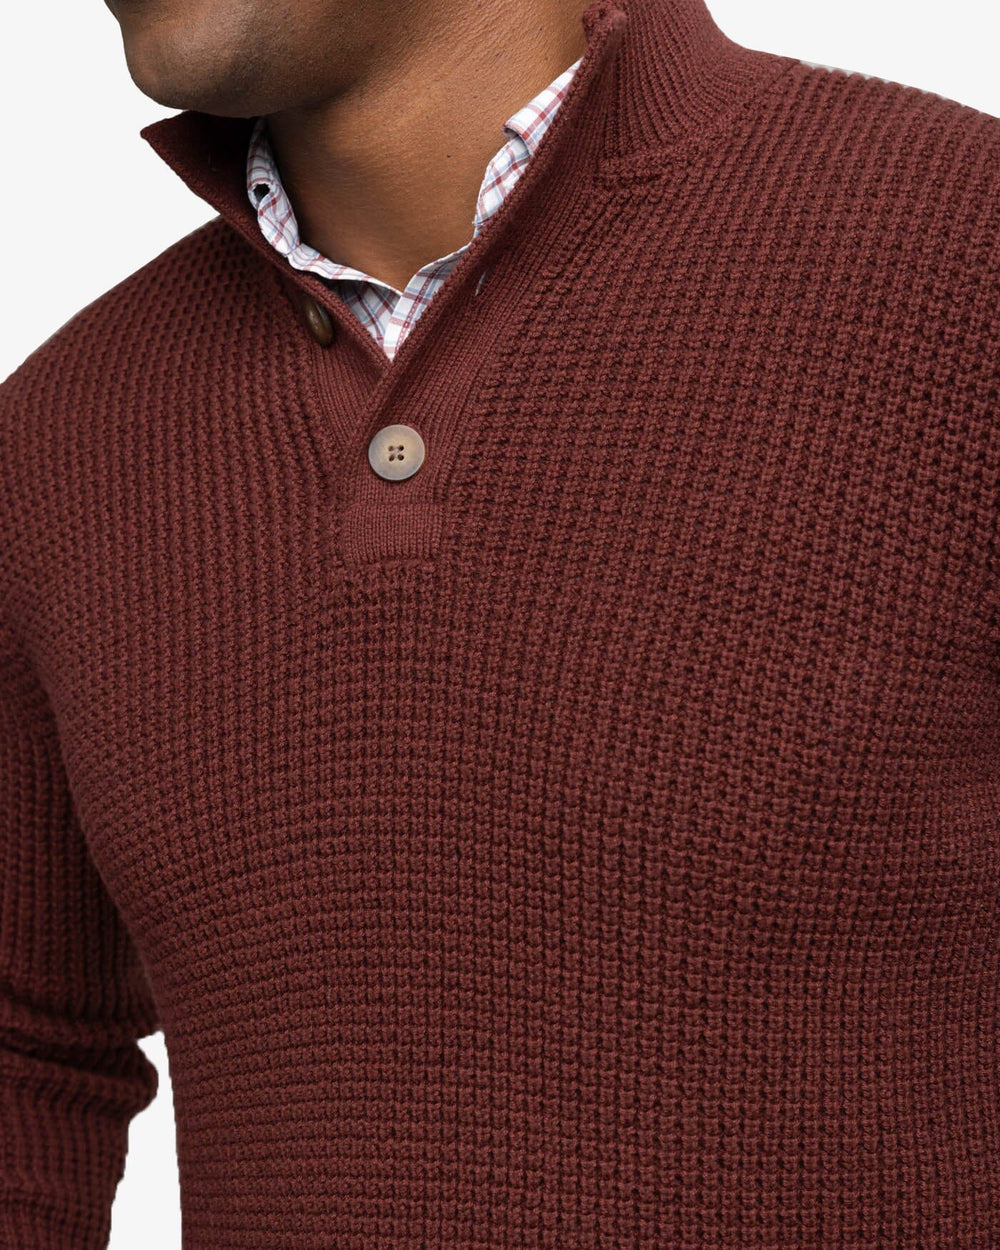 The detail view of the Southern Tide Westmont Heather Jade Quarter Zip Button by Southern Tide - Heather Bordeaux Red